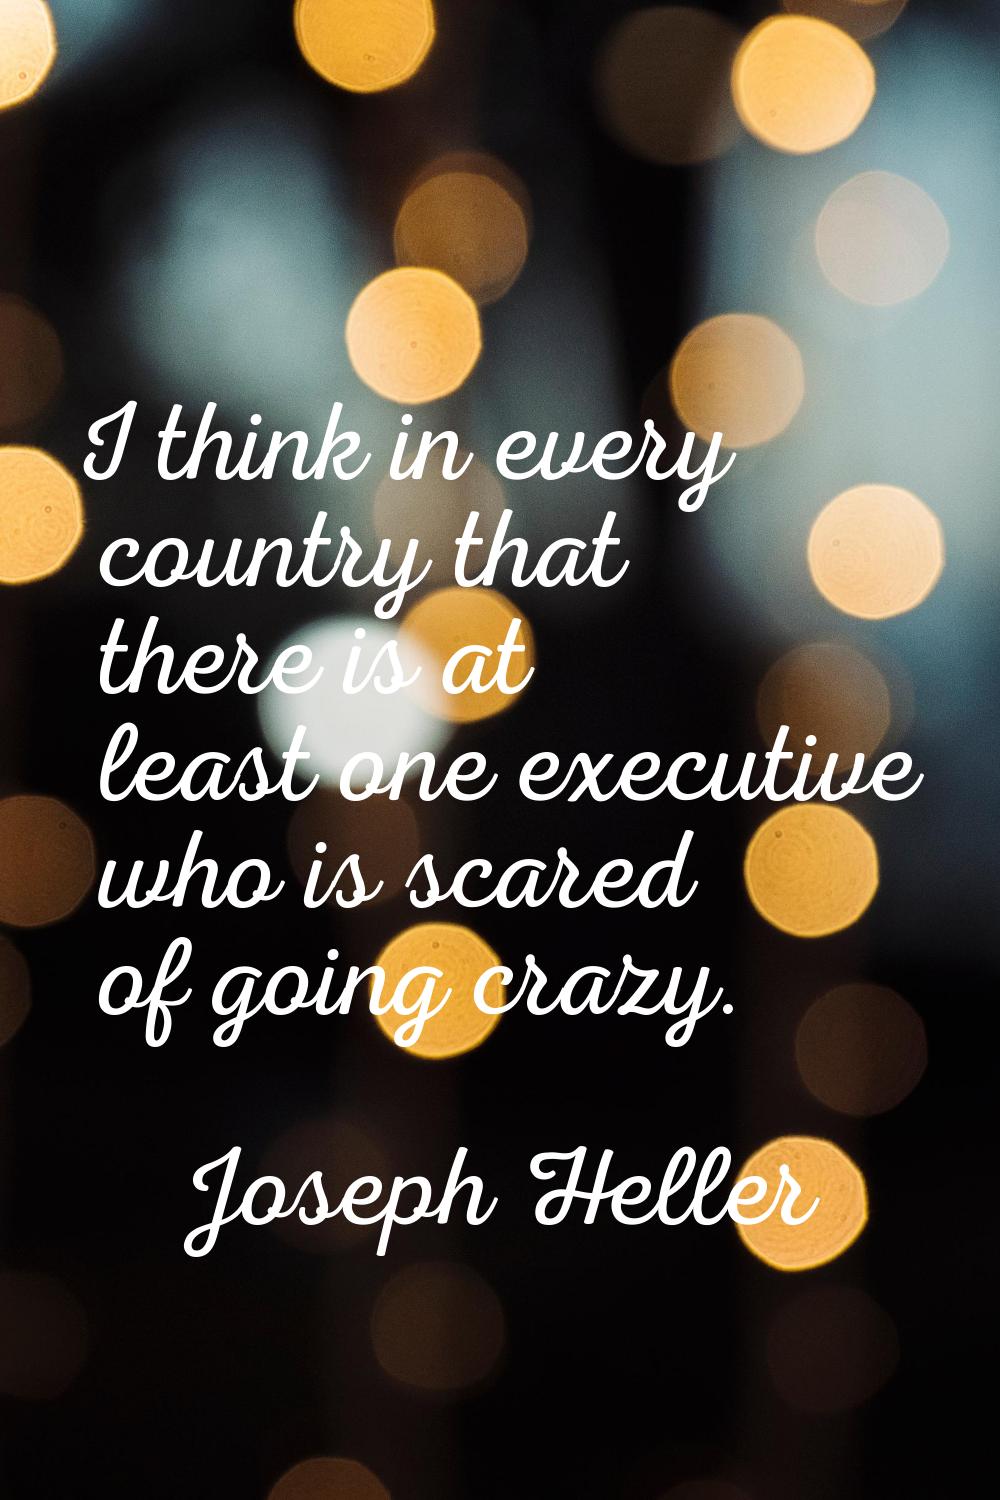 I think in every country that there is at least one executive who is scared of going crazy.